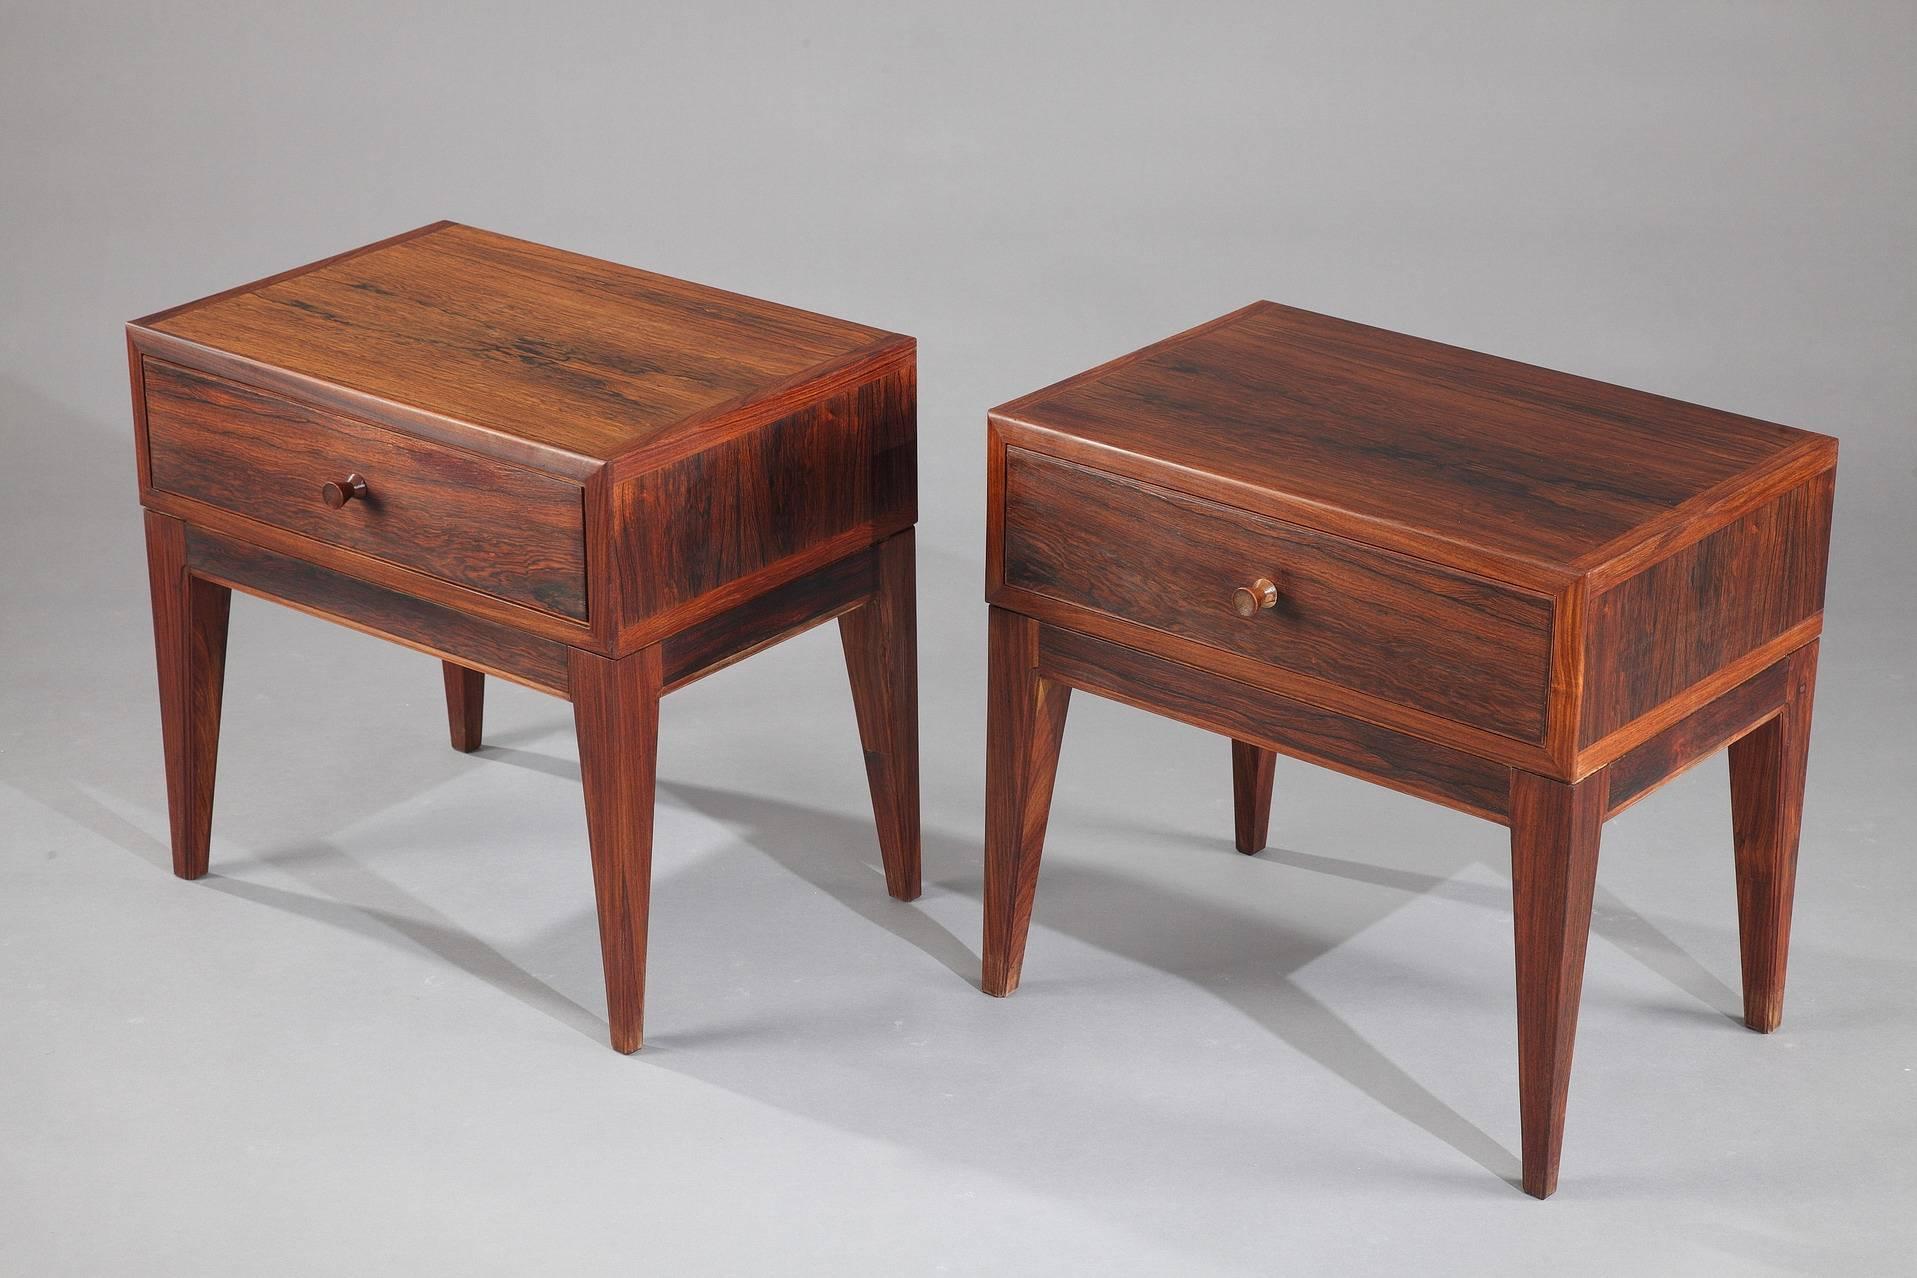 Pair of Brazilian rosewood side tables designed by Henry Rosengren Hansen in the 1960s. Each table provided with a drawer and a wooden plug. Made in Denmark. Very good vintage condition.


circa 1960
Dimensions: W 19.9 in, D 14.6 in, H 18.5